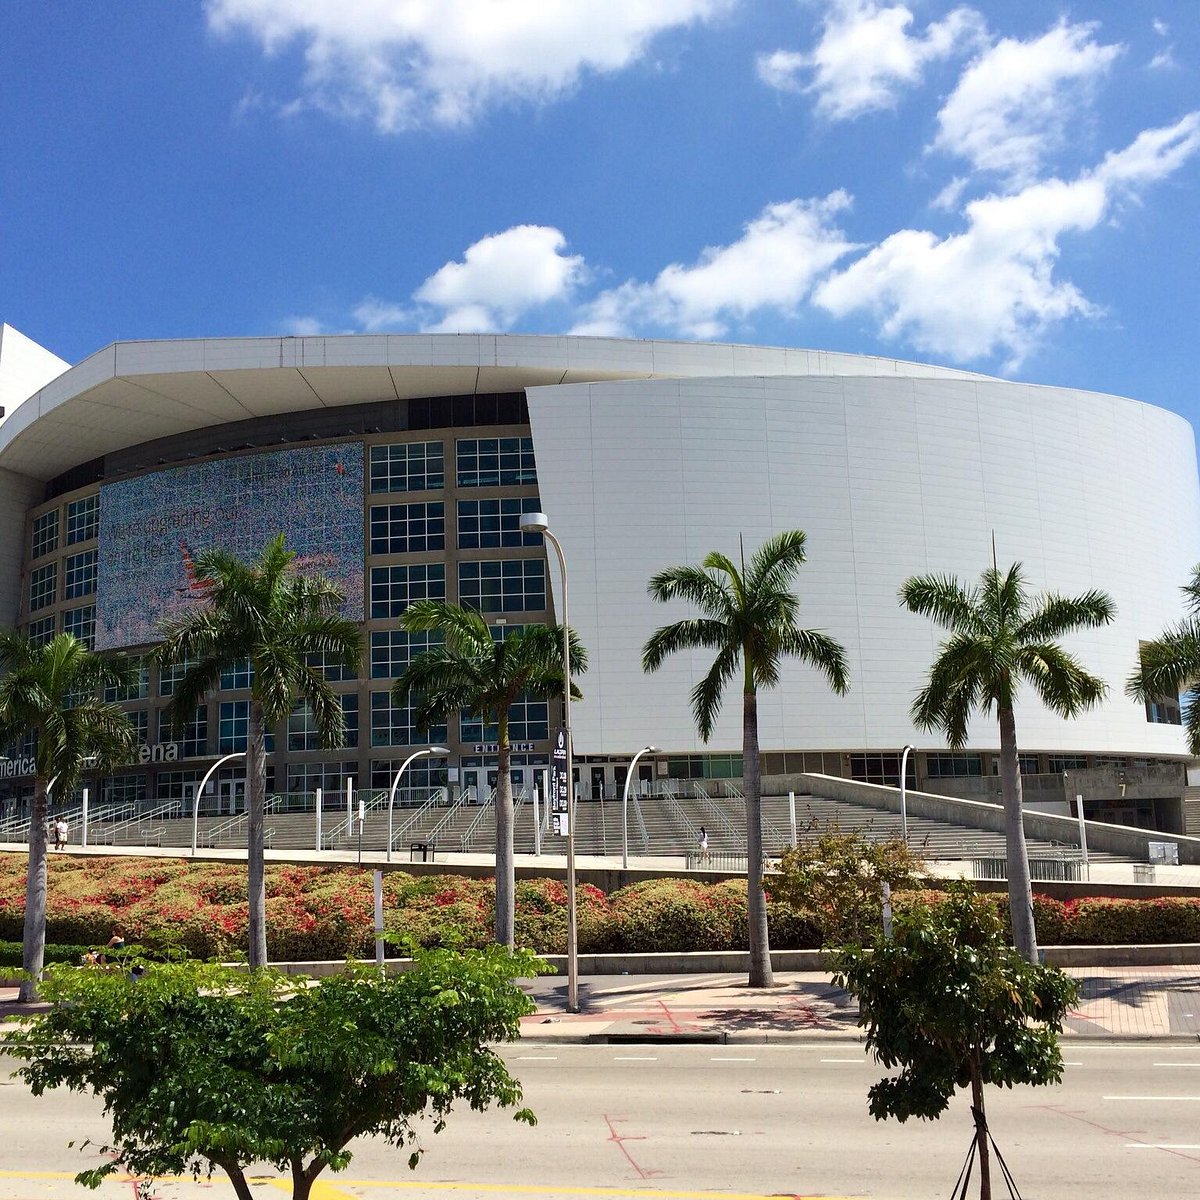 FTX Arena (American Airlines Arena) Parking Tips